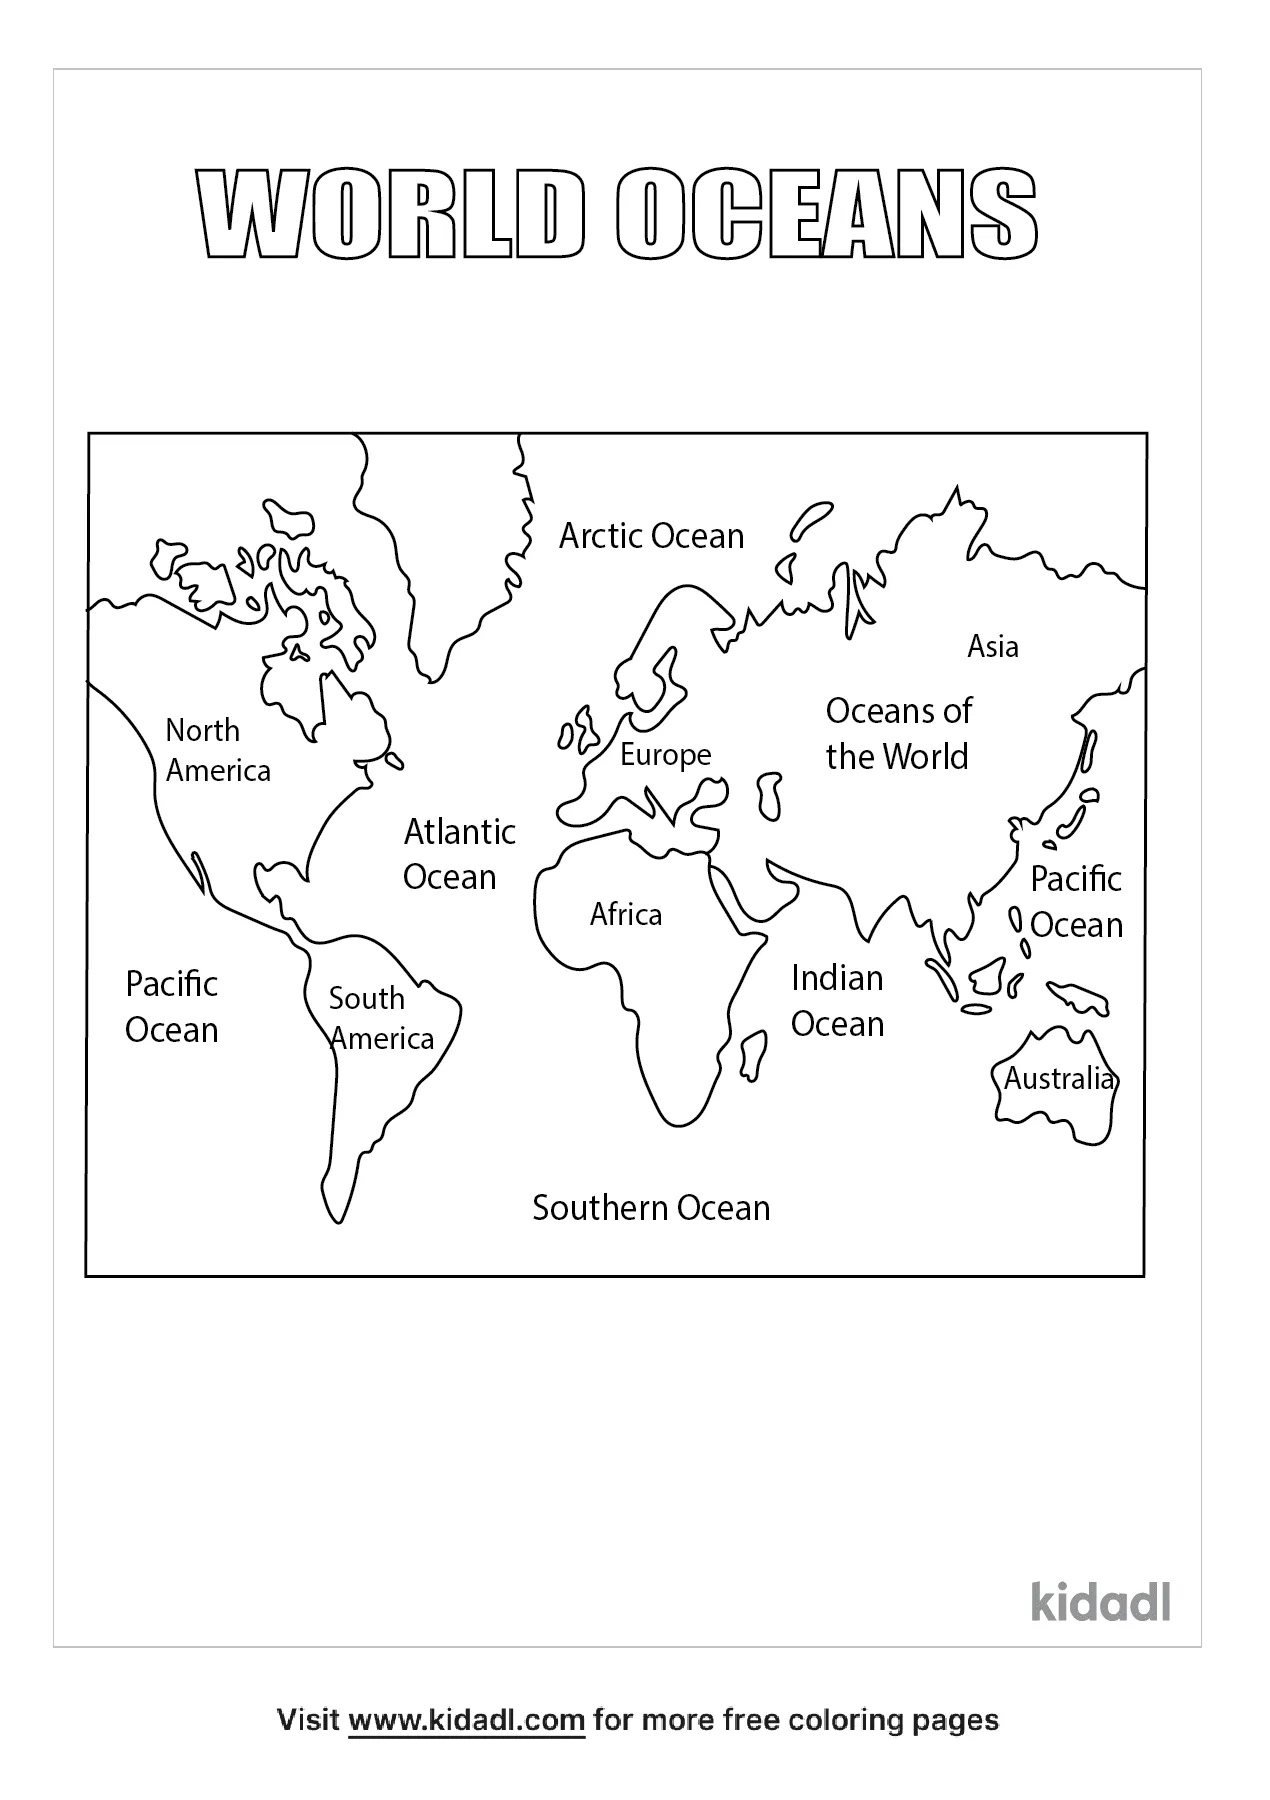 World Oceans Coloring Page